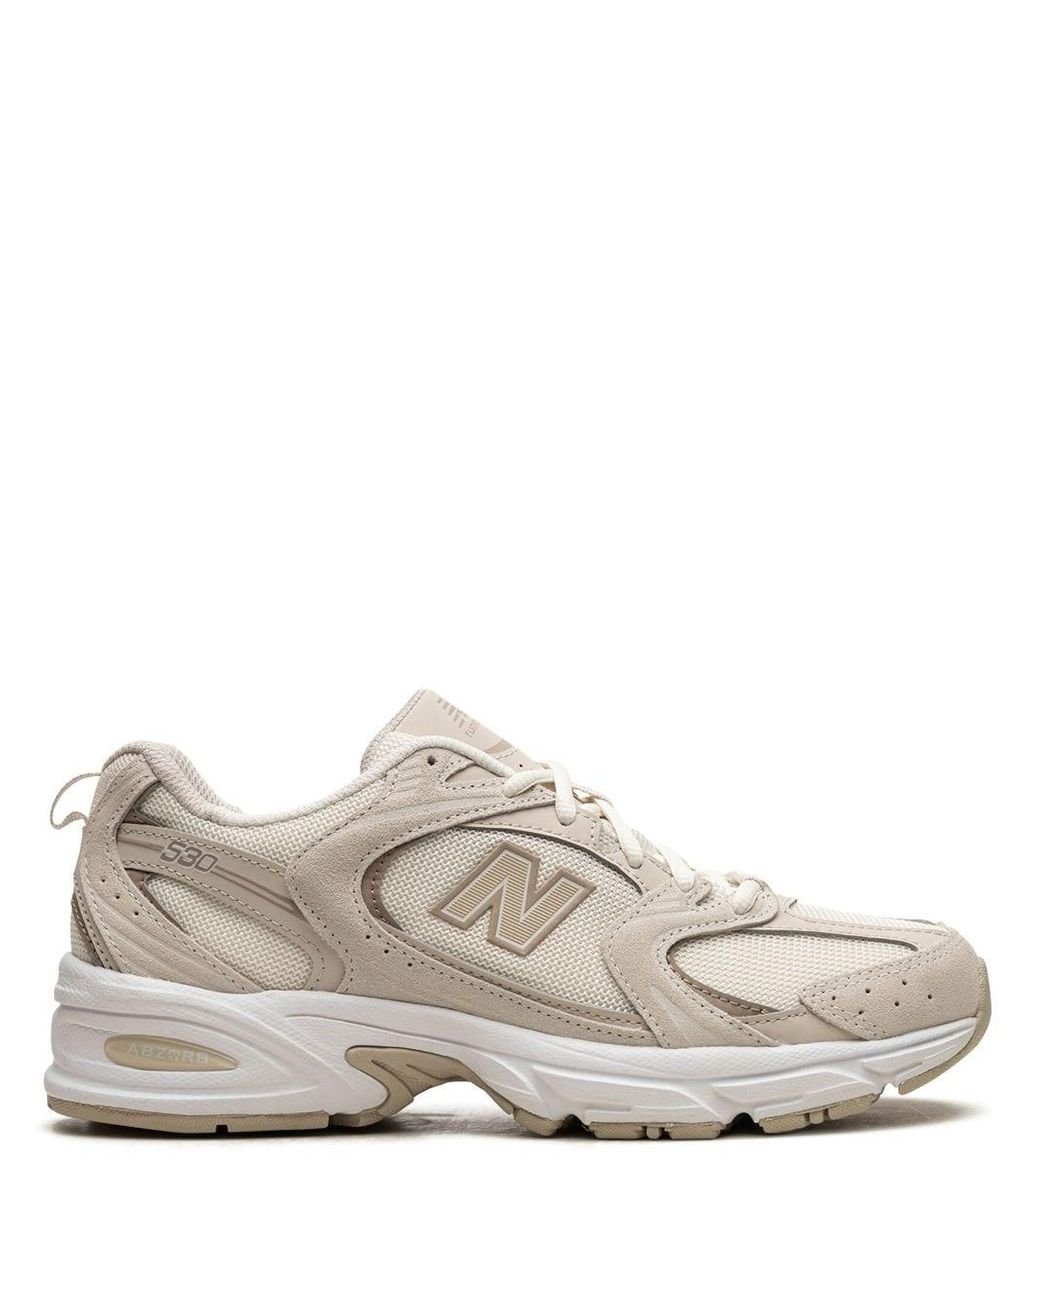 New Balance 530 "off White/cream" Sneakers | Lyst